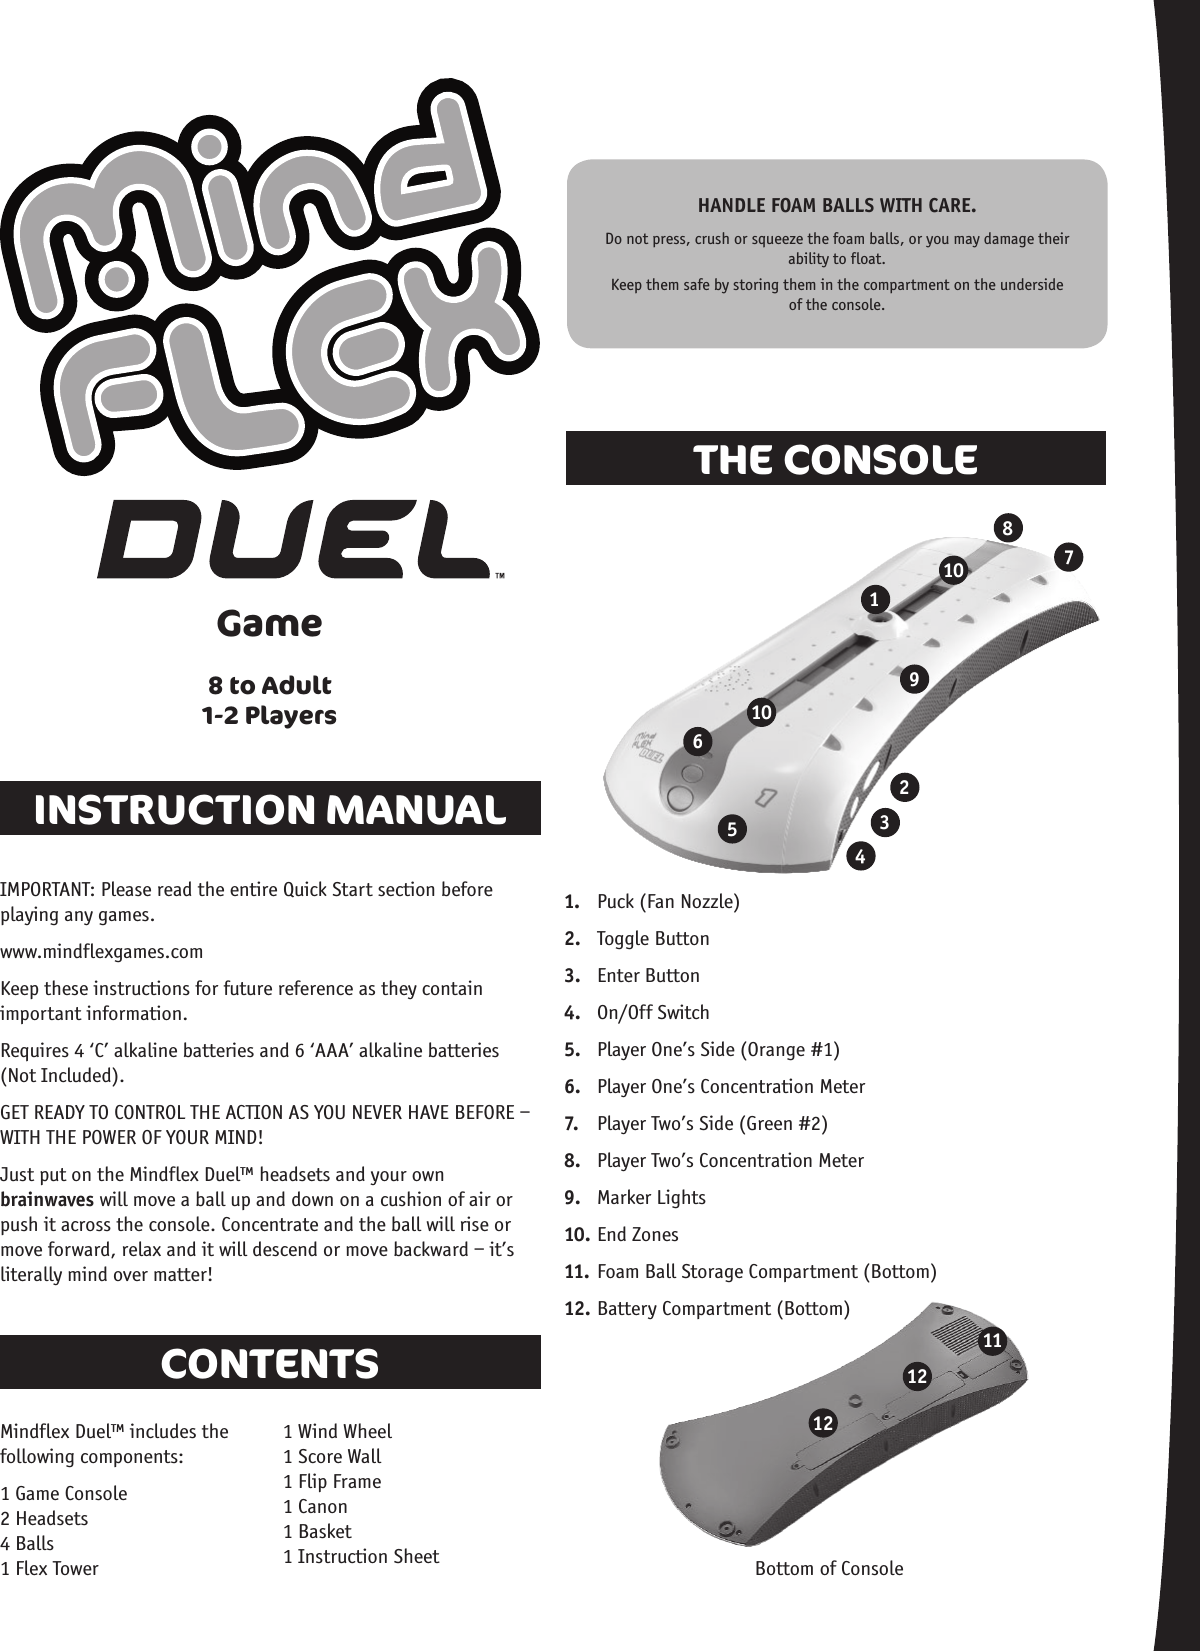 INSTRUCTION MANUALTHE CONSOLECONTENTSGame8 to Adult1-2 Players1112121 2 3 4 5 6 7 8 91010IMPORTANT: Please read the entire Quick Start section before playing any games.www.mindflexgames.comKeep these instructions for future reference as they contain important information.Requires 4 ‘C’ alkaline batteries and 6 ‘AAA’ alkaline batteries  (Not Included).GET READY TO CONTROL THE ACTION AS YOU NEVER HAVE BEFORE – WITH THE POWER OF YOUR MIND!Just put on the Mindflex Duel™ headsets and your own brainwaves will move a ball up and down on a cushion of air or push it across the console. Concentrate and the ball will rise or move forward, relax and it will descend or move backward – it’s literally mind over matter!Mindflex Duel™ includes the following components:1 Game Console 2 Headsets 4 Balls 1 Flex Tower 1 Wind Wheel 1 Score Wall 1 Flip Frame 1 Canon 1 Basket 1 Instruction Sheet Bottom of Console1.  Puck (Fan Nozzle)2.  Toggle Button3.  Enter Button4.  On/Off Switch 5.  Player One’s Side (Orange #1)6.  Player One’s Concentration Meter7.  Player Two’s Side (Green #2)8.  Player Two’s Concentration Meter9.  Marker Lights10. End Zones11. Foam Ball Storage Compartment (Bottom)12. Battery Compartment (Bottom)HANDLE FOAM BALLS WITH CARE.Do not press, crush or squeeze the foam balls, or you may damage their ability to float. Keep them safe by storing them in the compartment on the underside of the console.